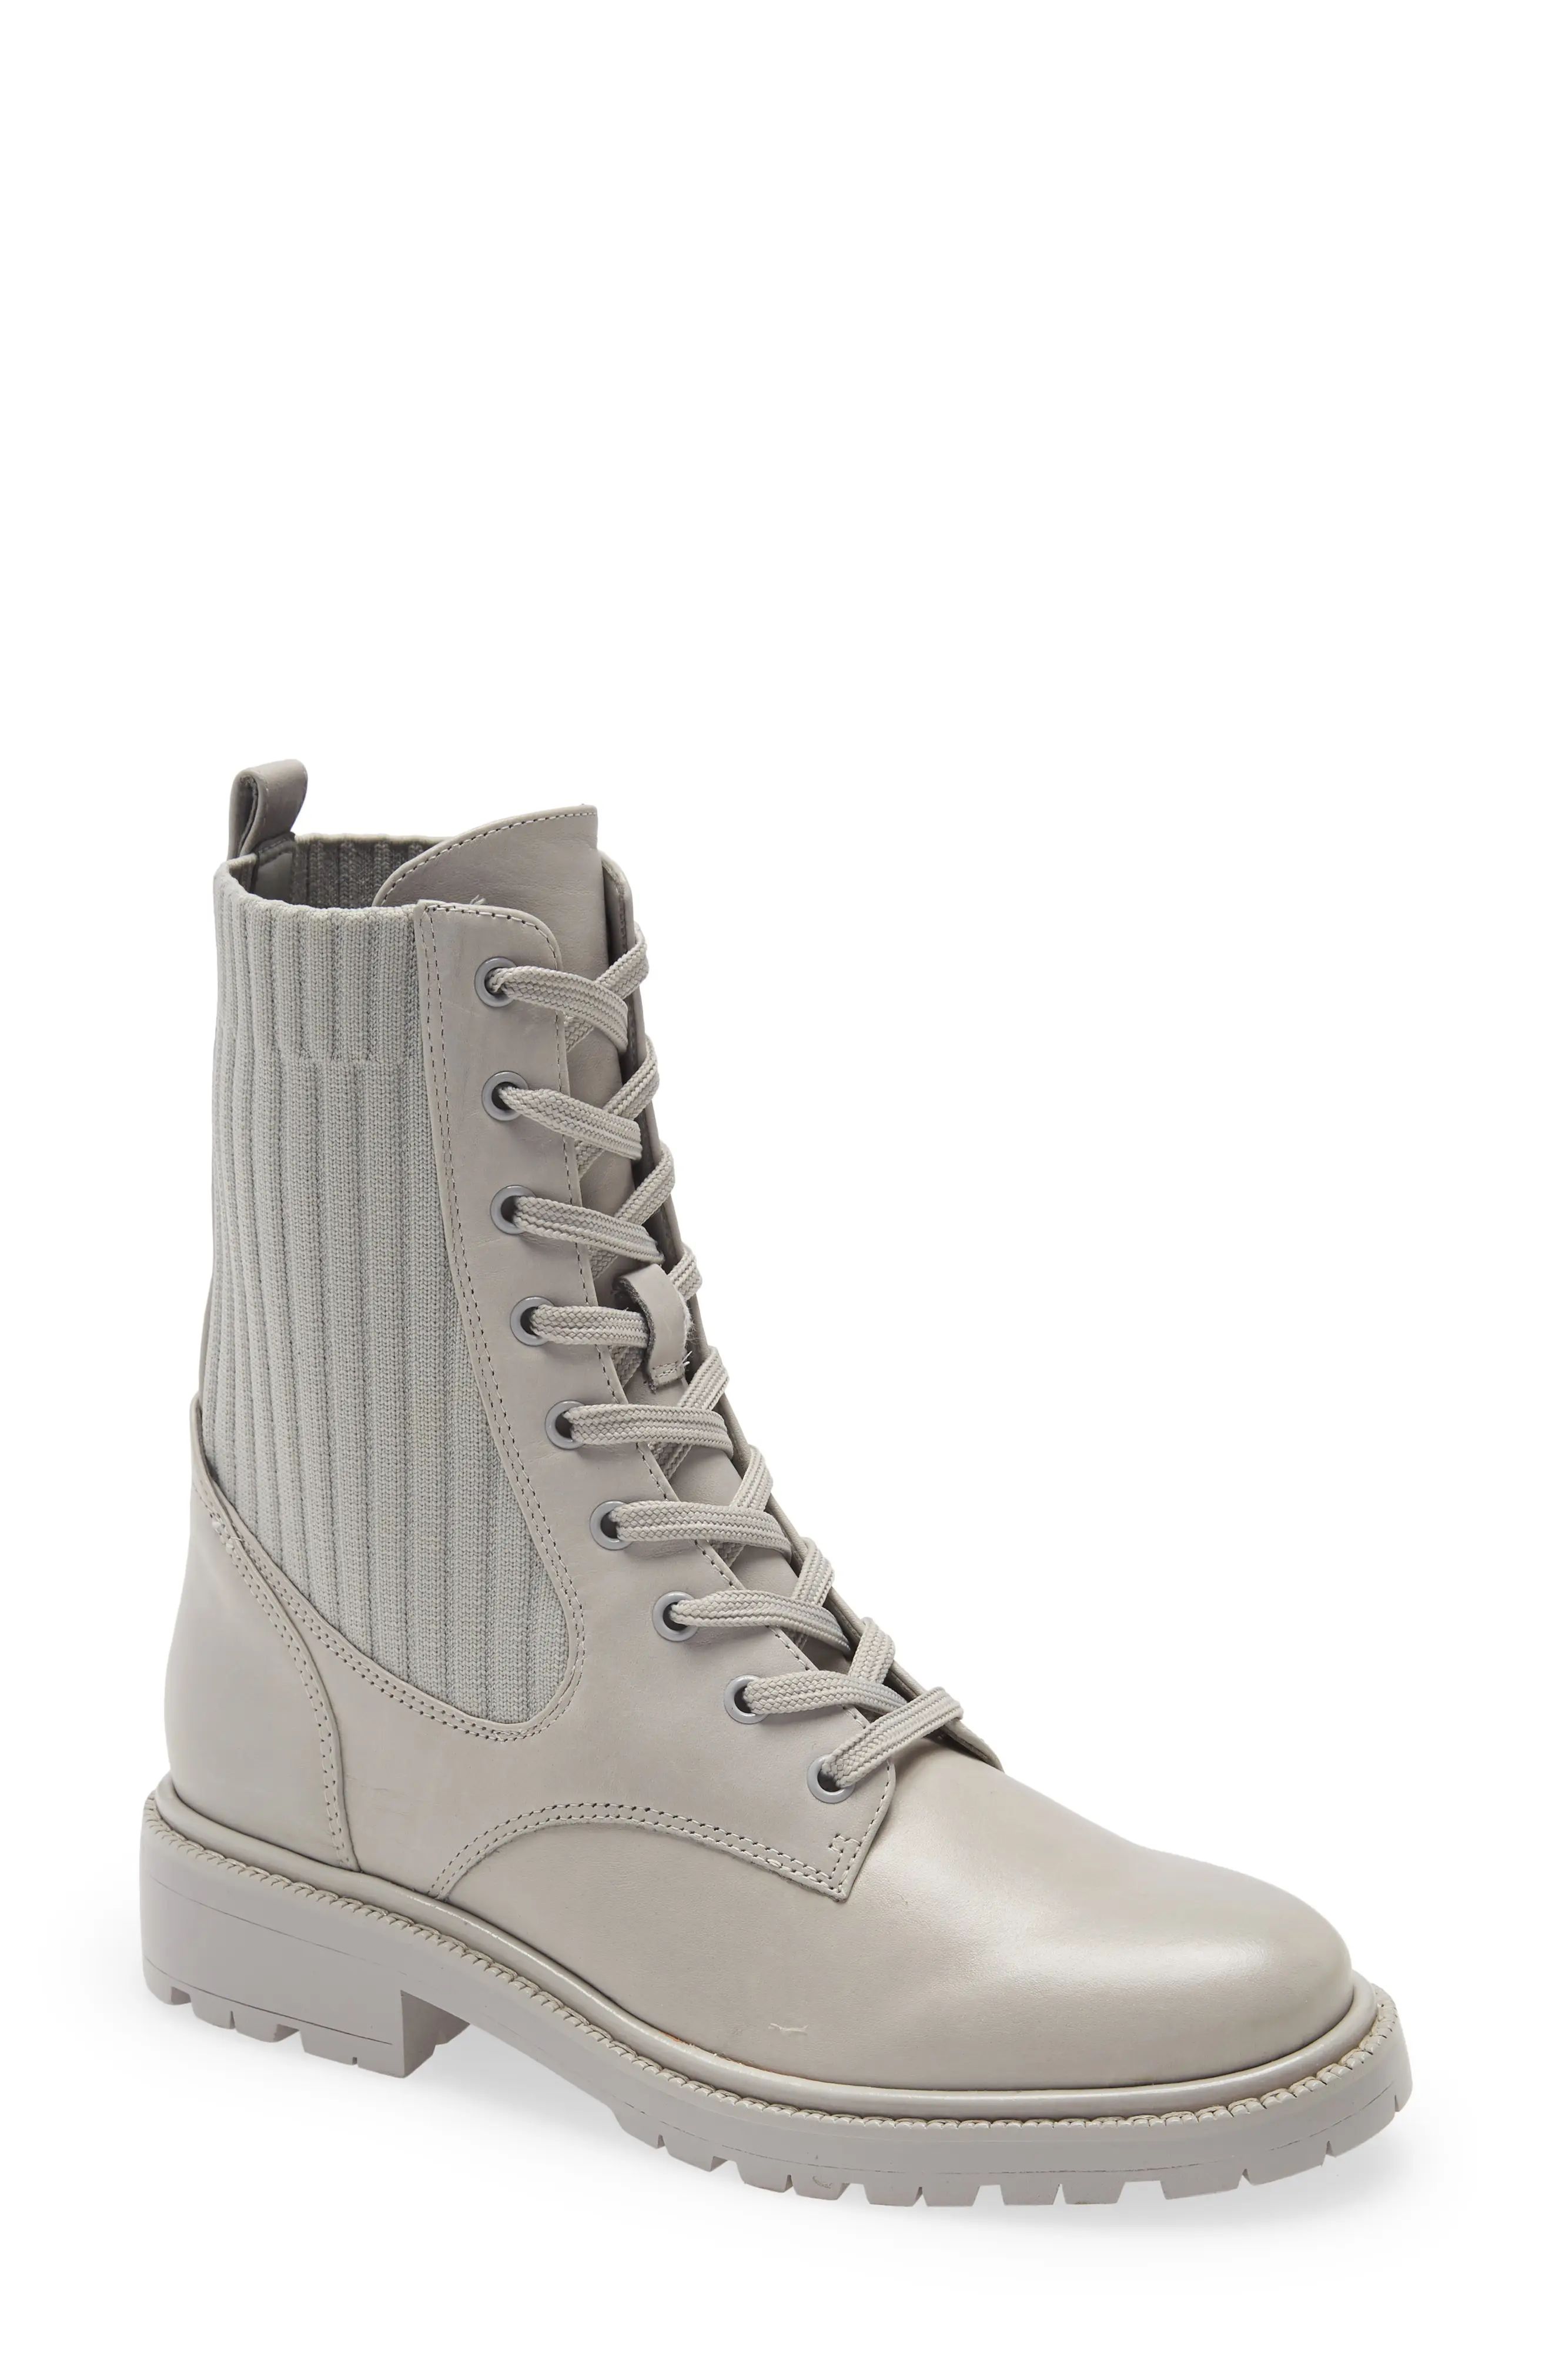 Sam Edelman Lydell Mixed Media Combat Boot, Size 9.5 in Pebble Grey at Nordstrom | Nordstrom